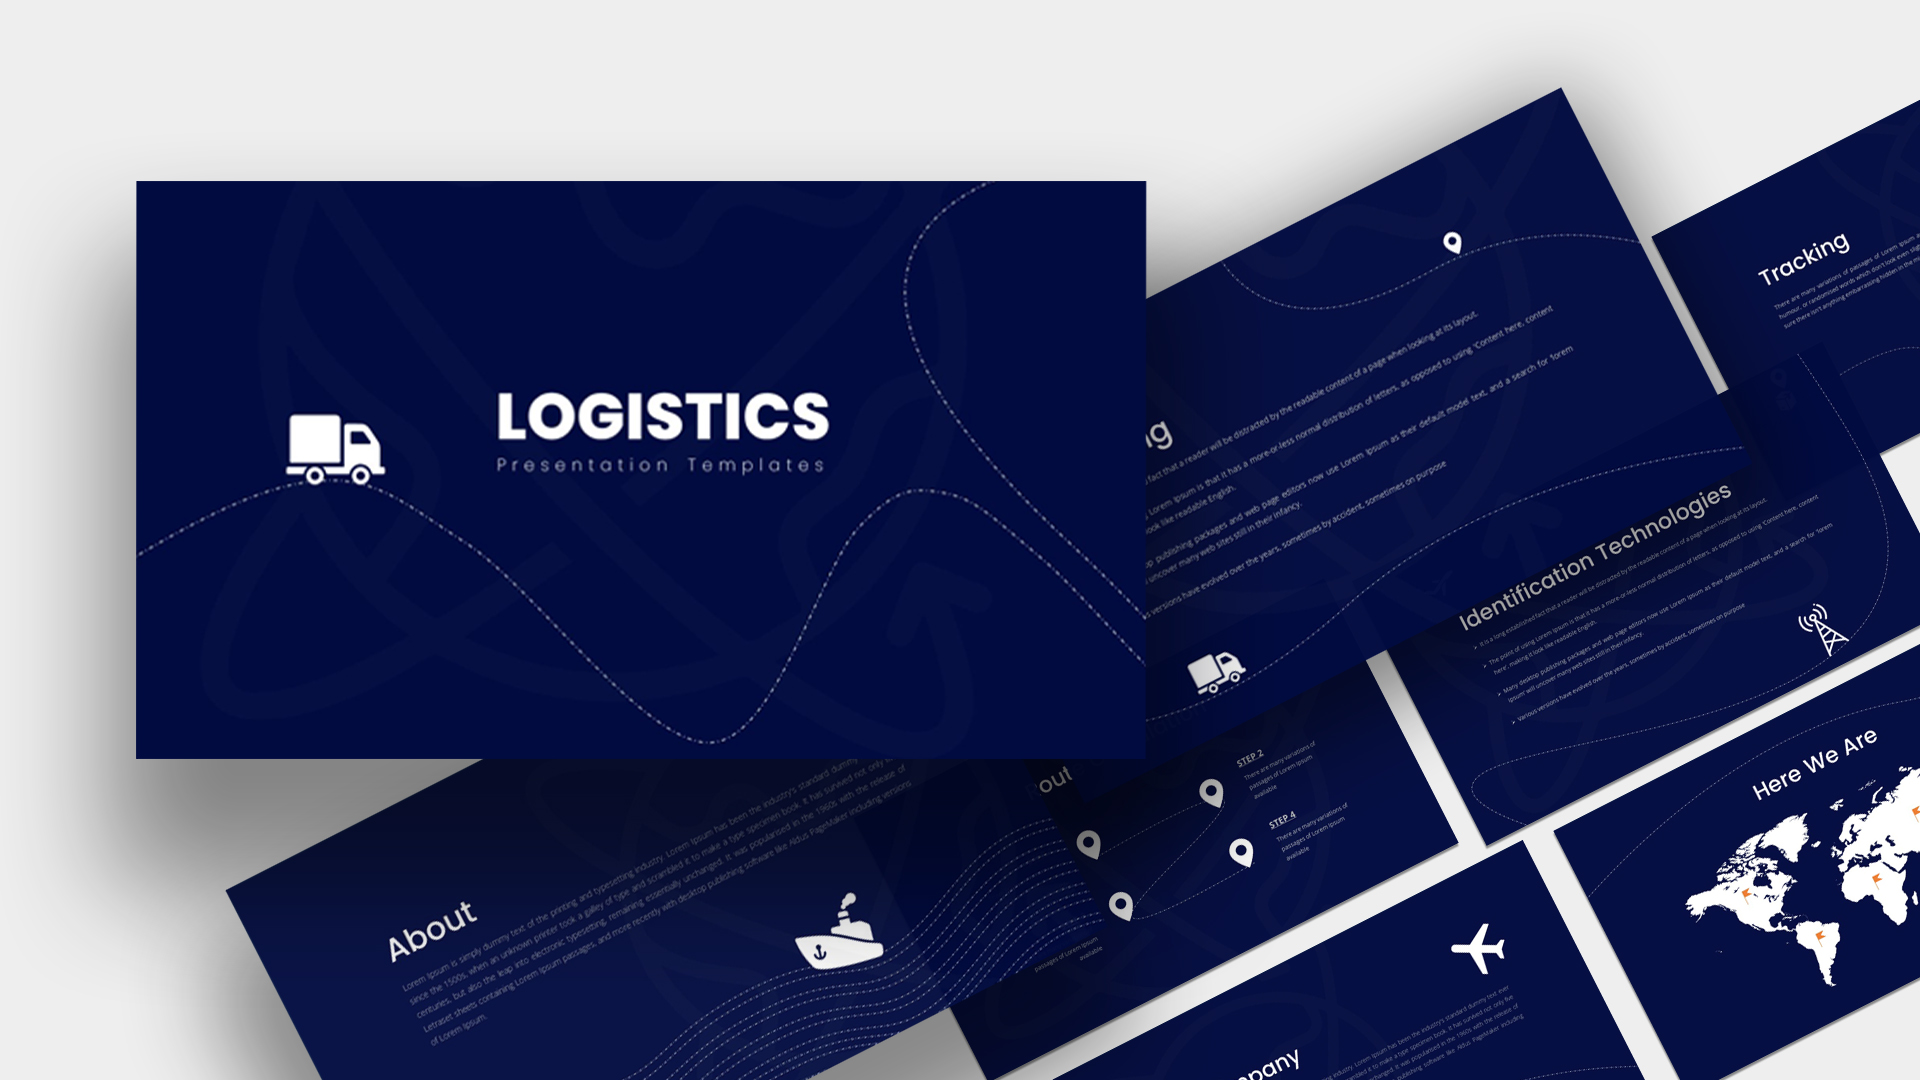 Powerpoint Logistics Templates Cover Page